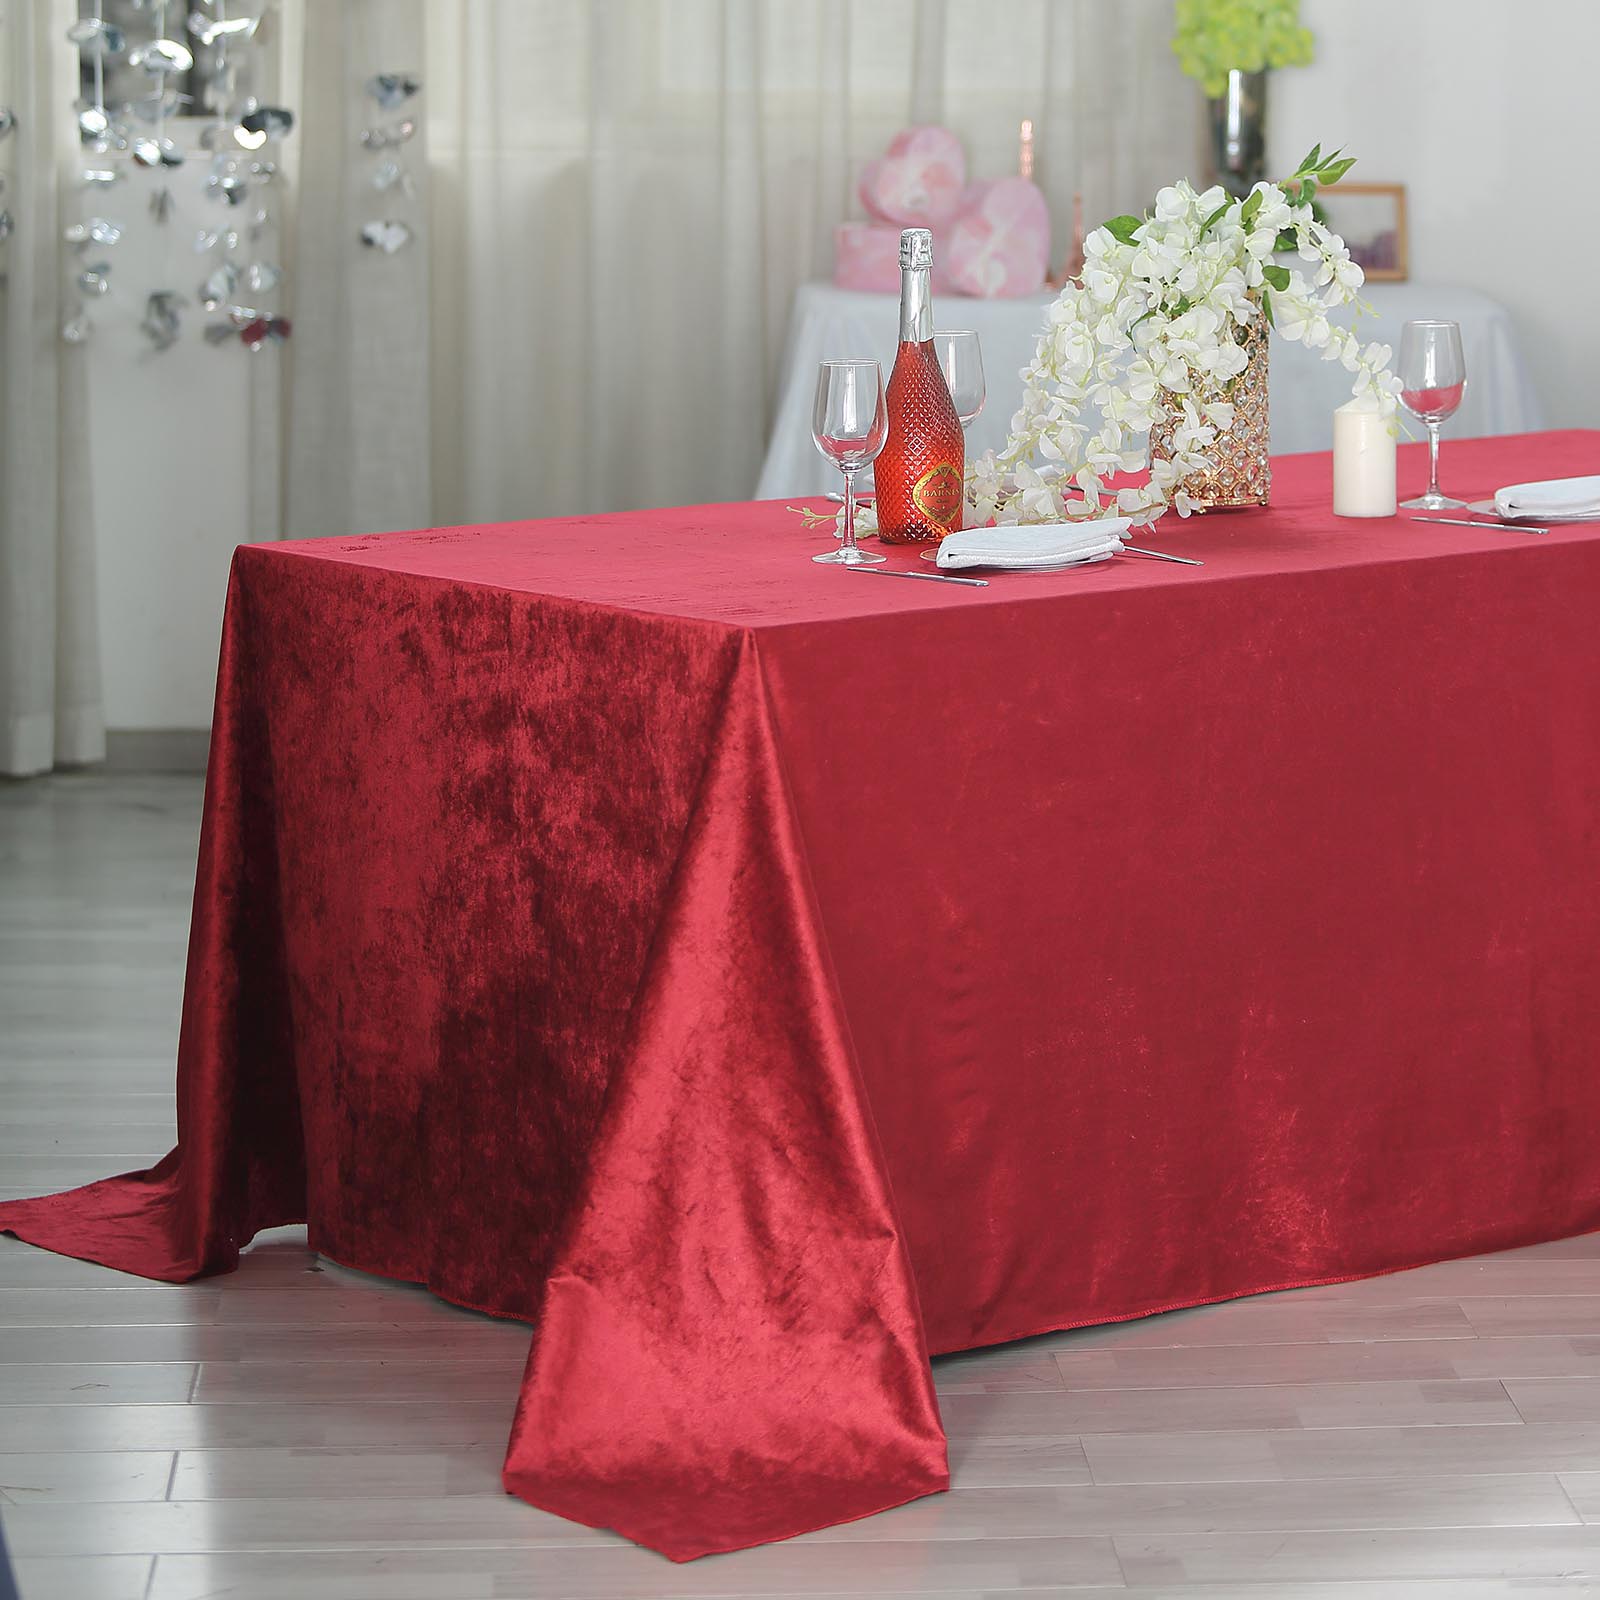 This That Bermuda Party Rentals » Premium Velvet Tablecloth (More Colors Available)